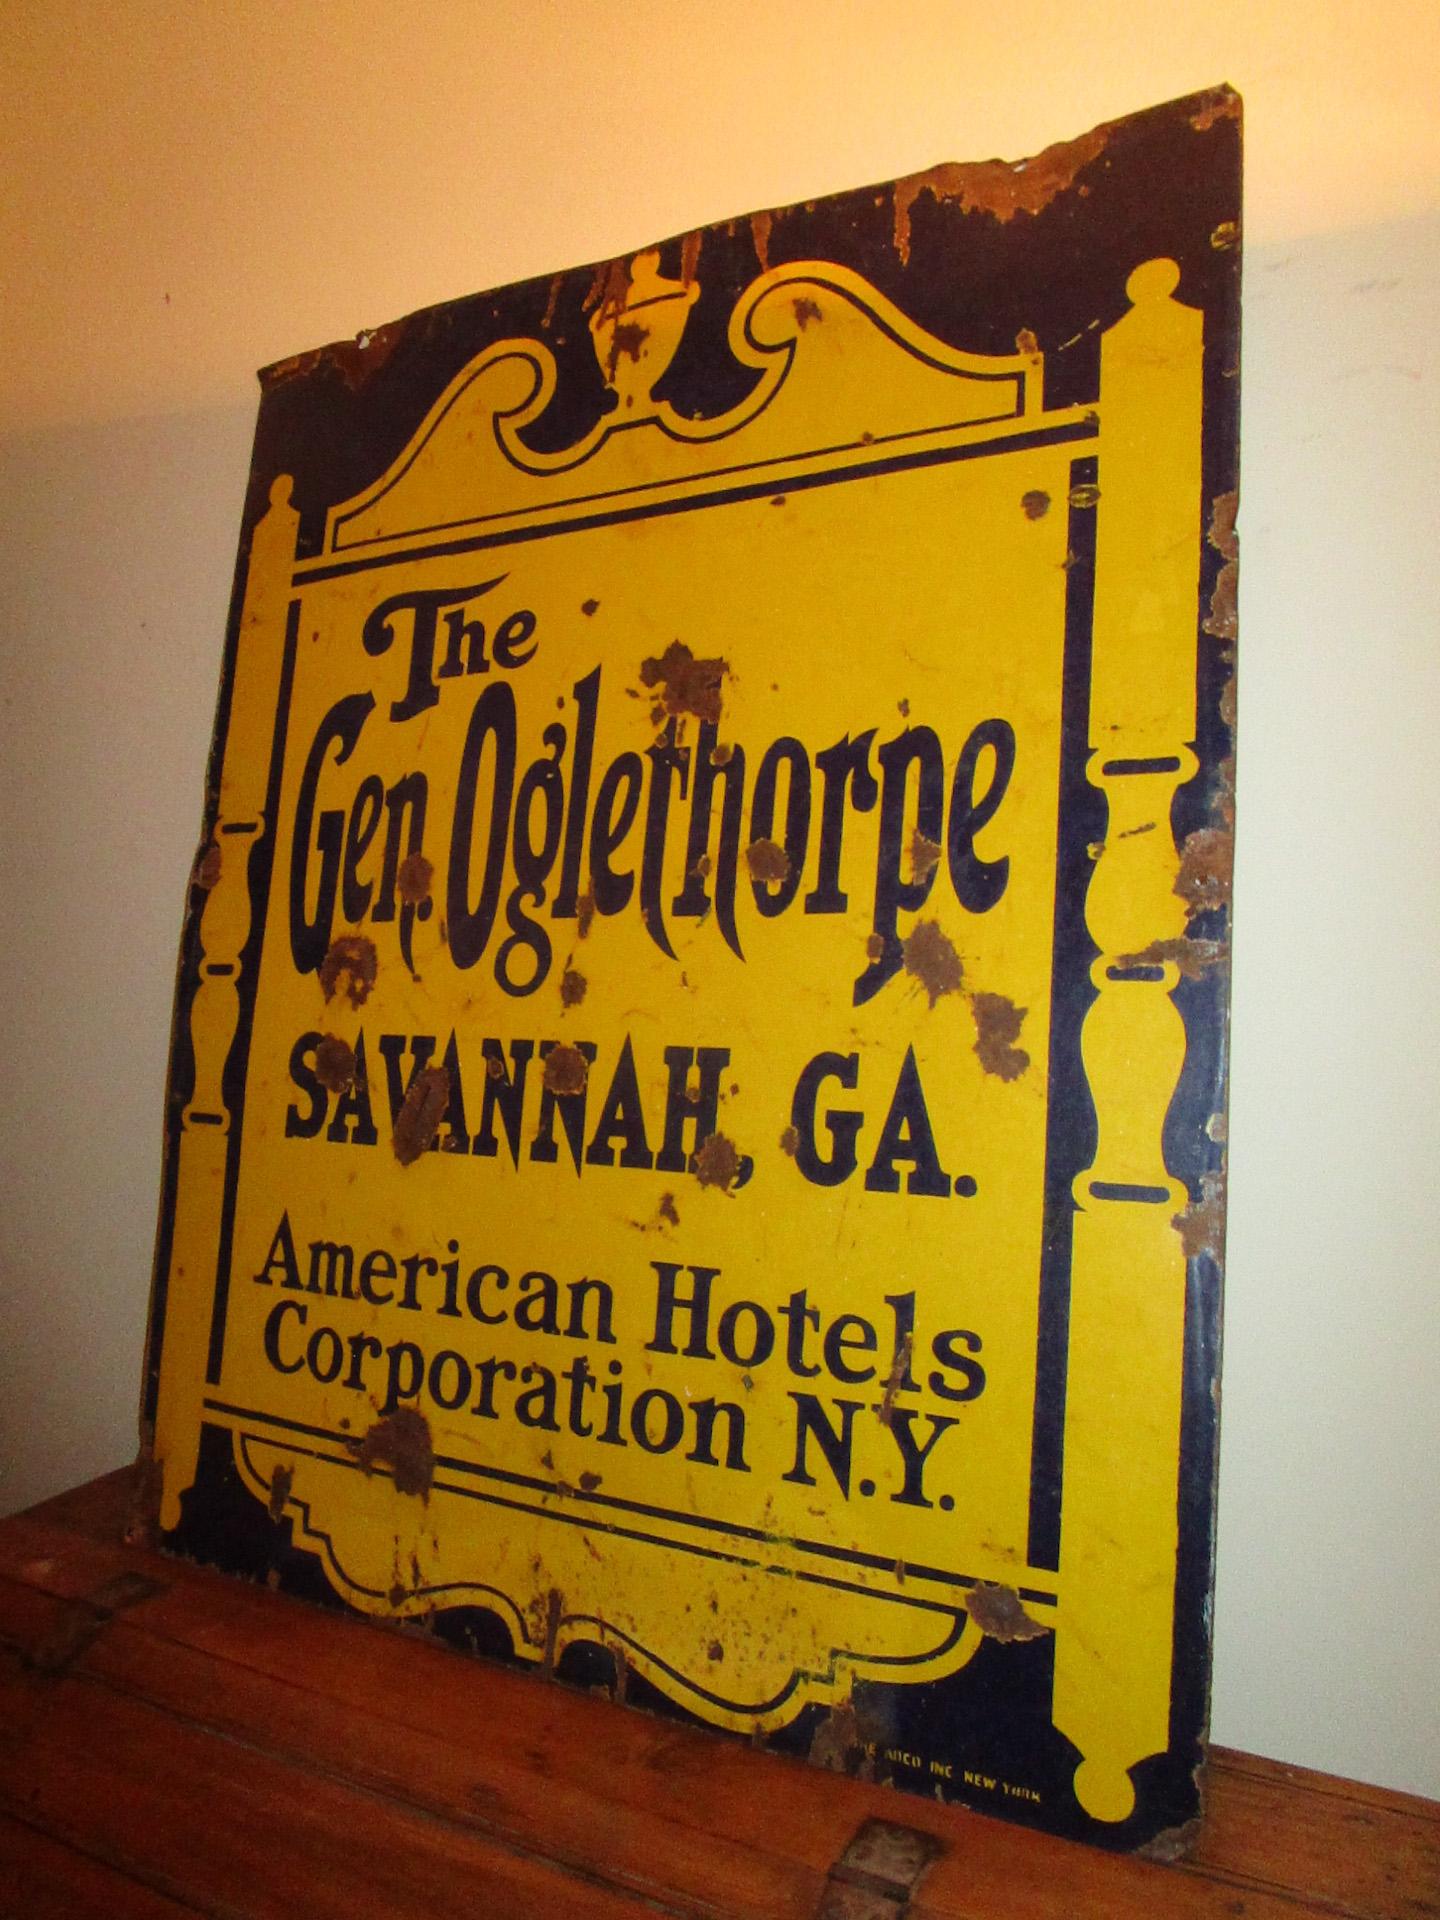 This double sided large tin sign advertises two different hotels in two different states. The Oglethorpe Hotel was built in 1927 as a luxury resort by Henry Walthour on the Wilmington River in Savannah, Georgia. Supposedly construction was financed